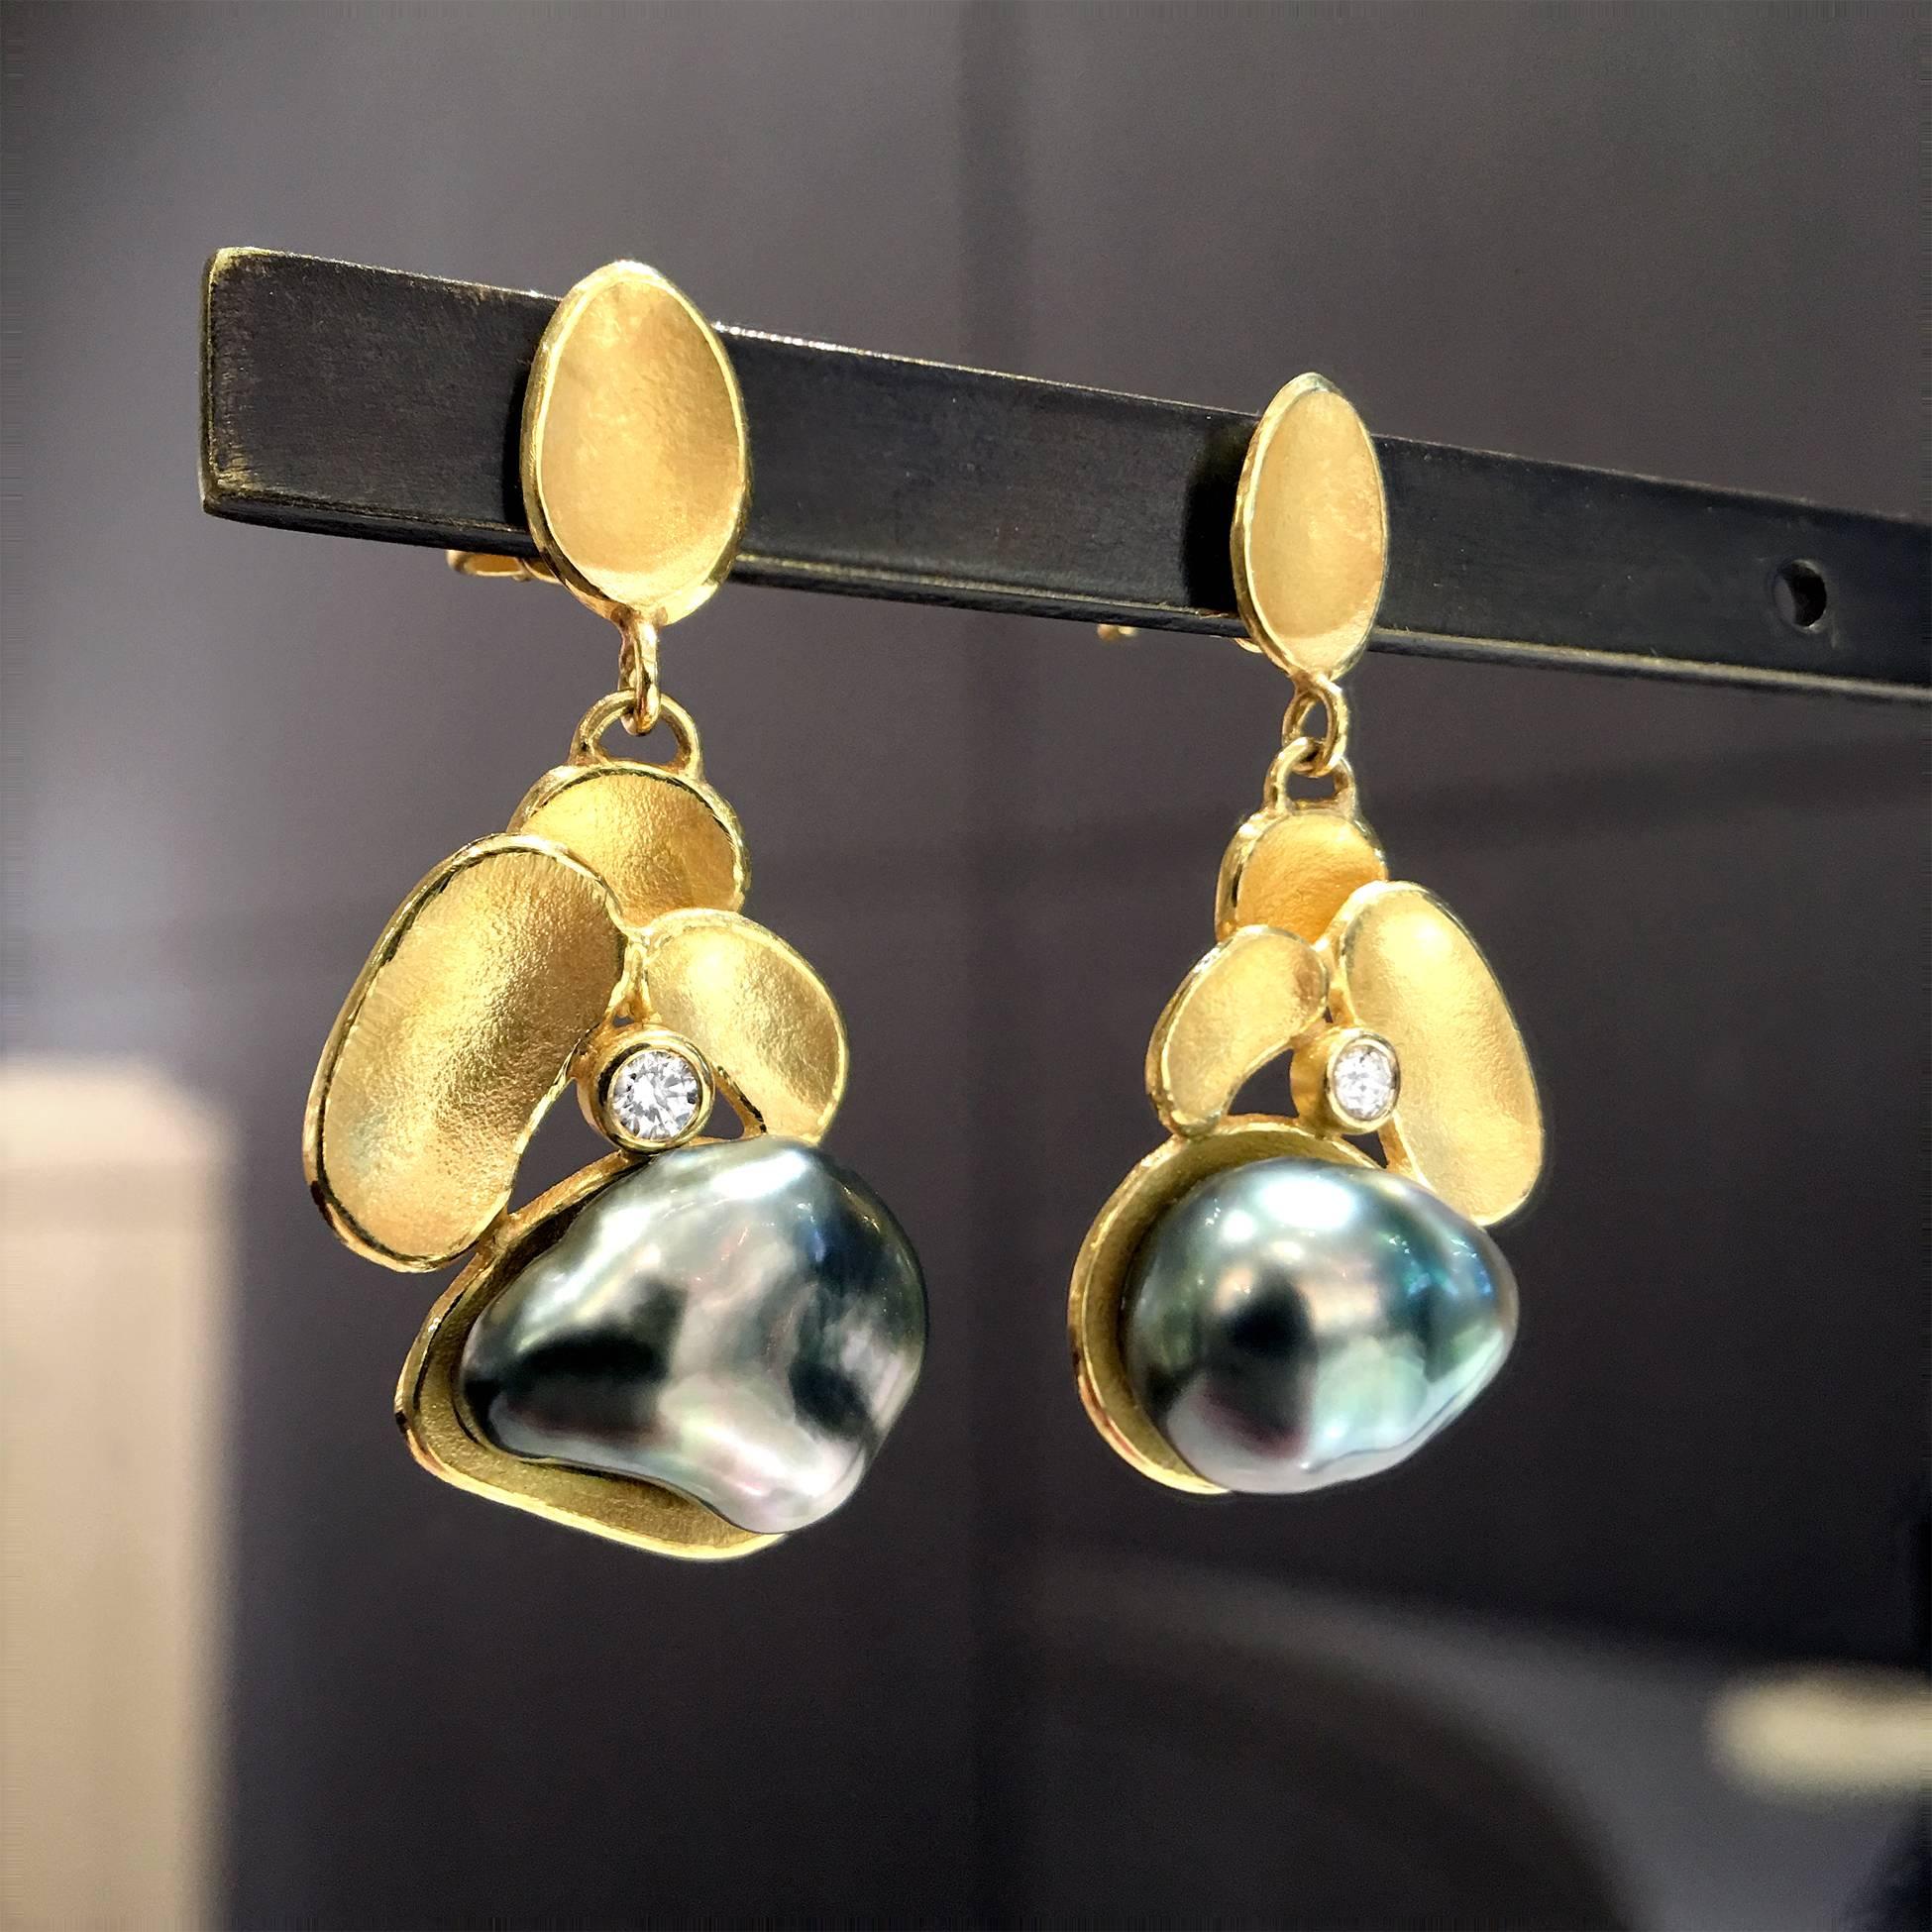 One of a Kind Petal Drop Earrings handmade in signature matte-finished 18k yellow gold by acclaimed jewelry artist Barbara Heinrich featuring two stunning, strongly iridescent dark gray Tahitian Keshi pearls and accented with two round brilliant-cut